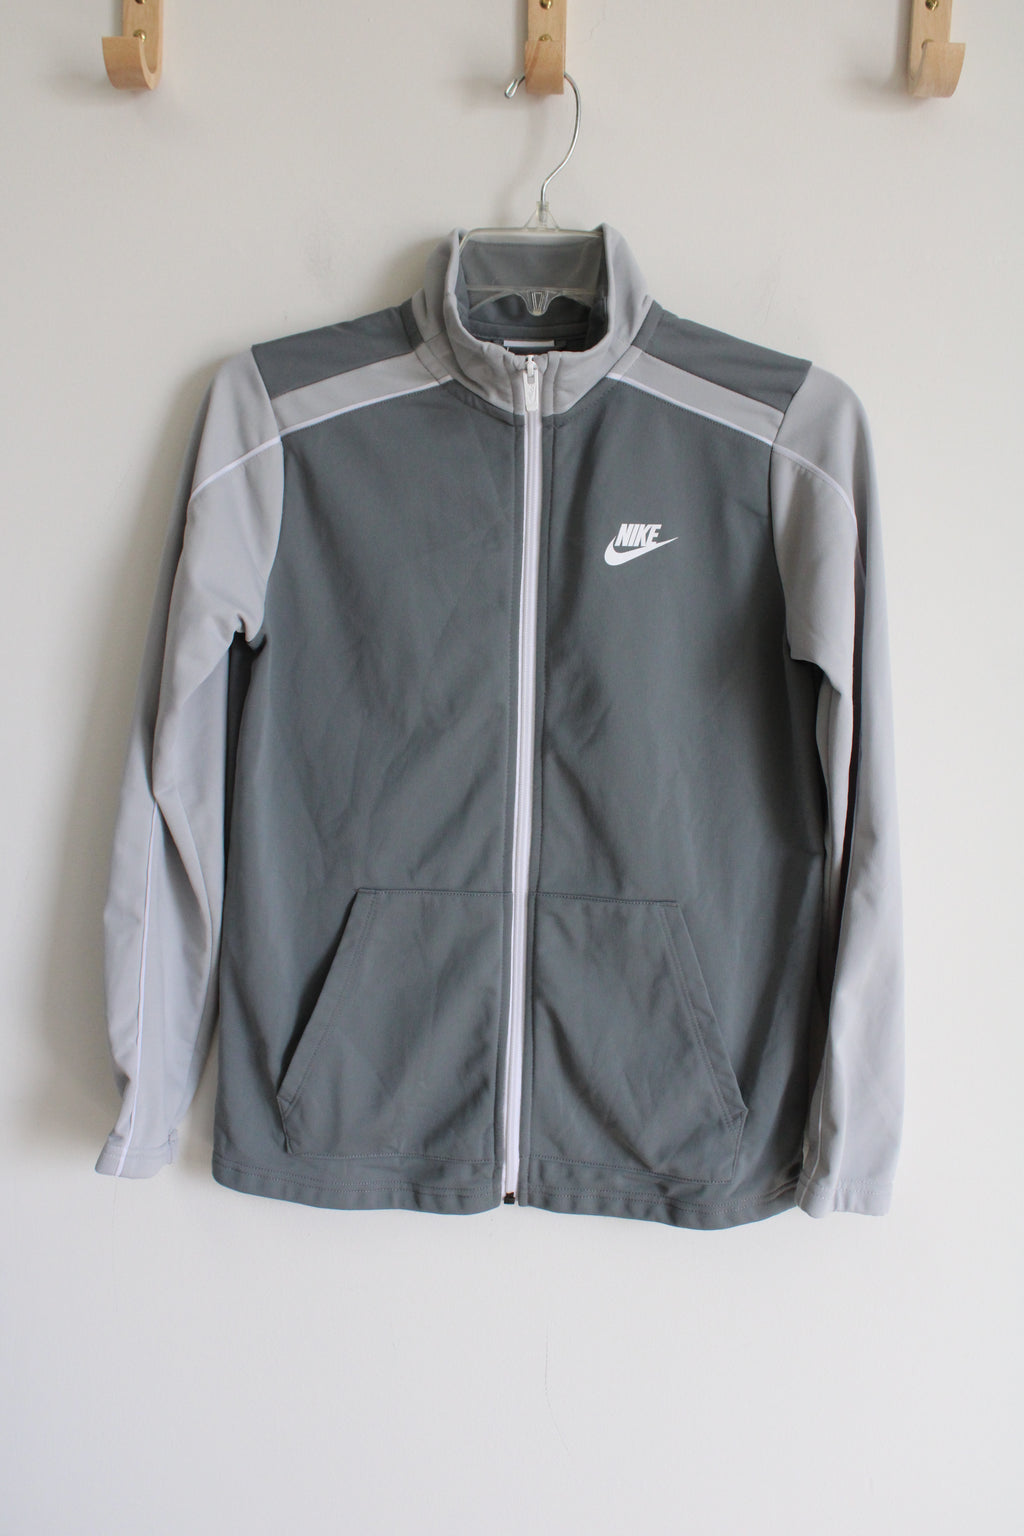 Nike Gray Color Blocked Fleece Lined Jacket | Youth L (14/16)